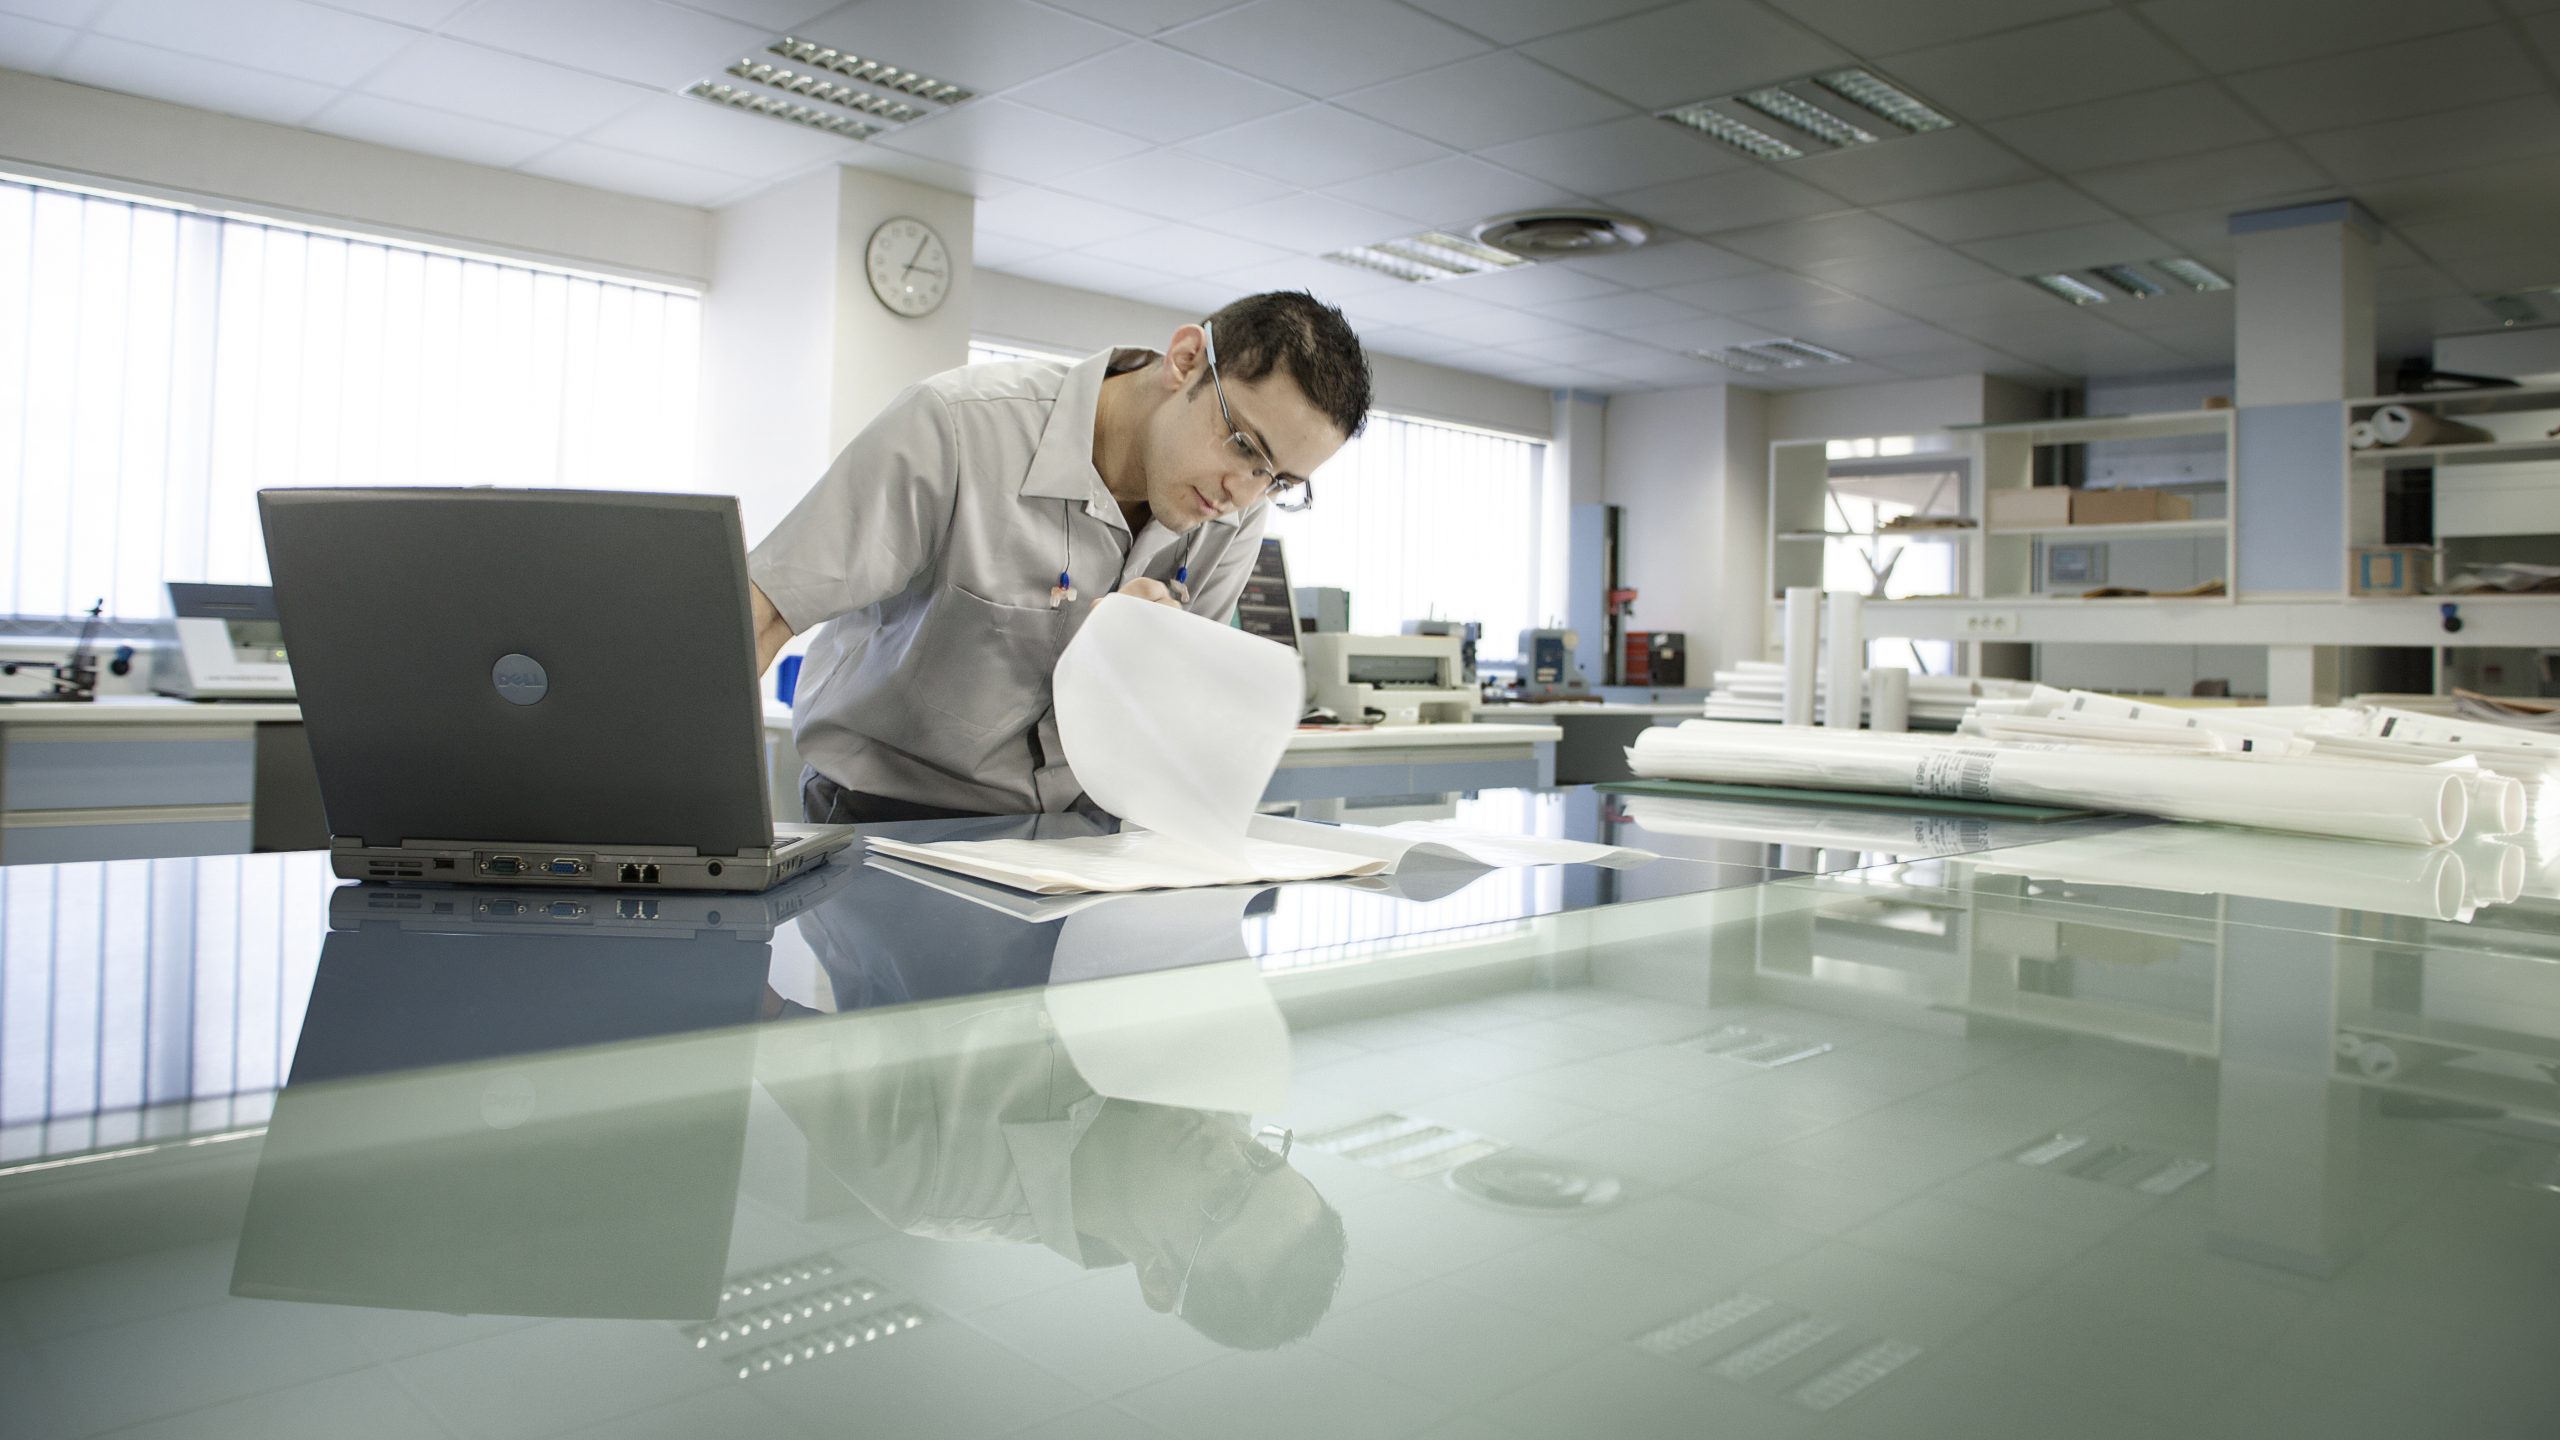 A laboratory technician at work, inspecting papers with a laptop computer in front of him in a big room. Corporate photography. Photographer Tuomas Harjumaaskola.